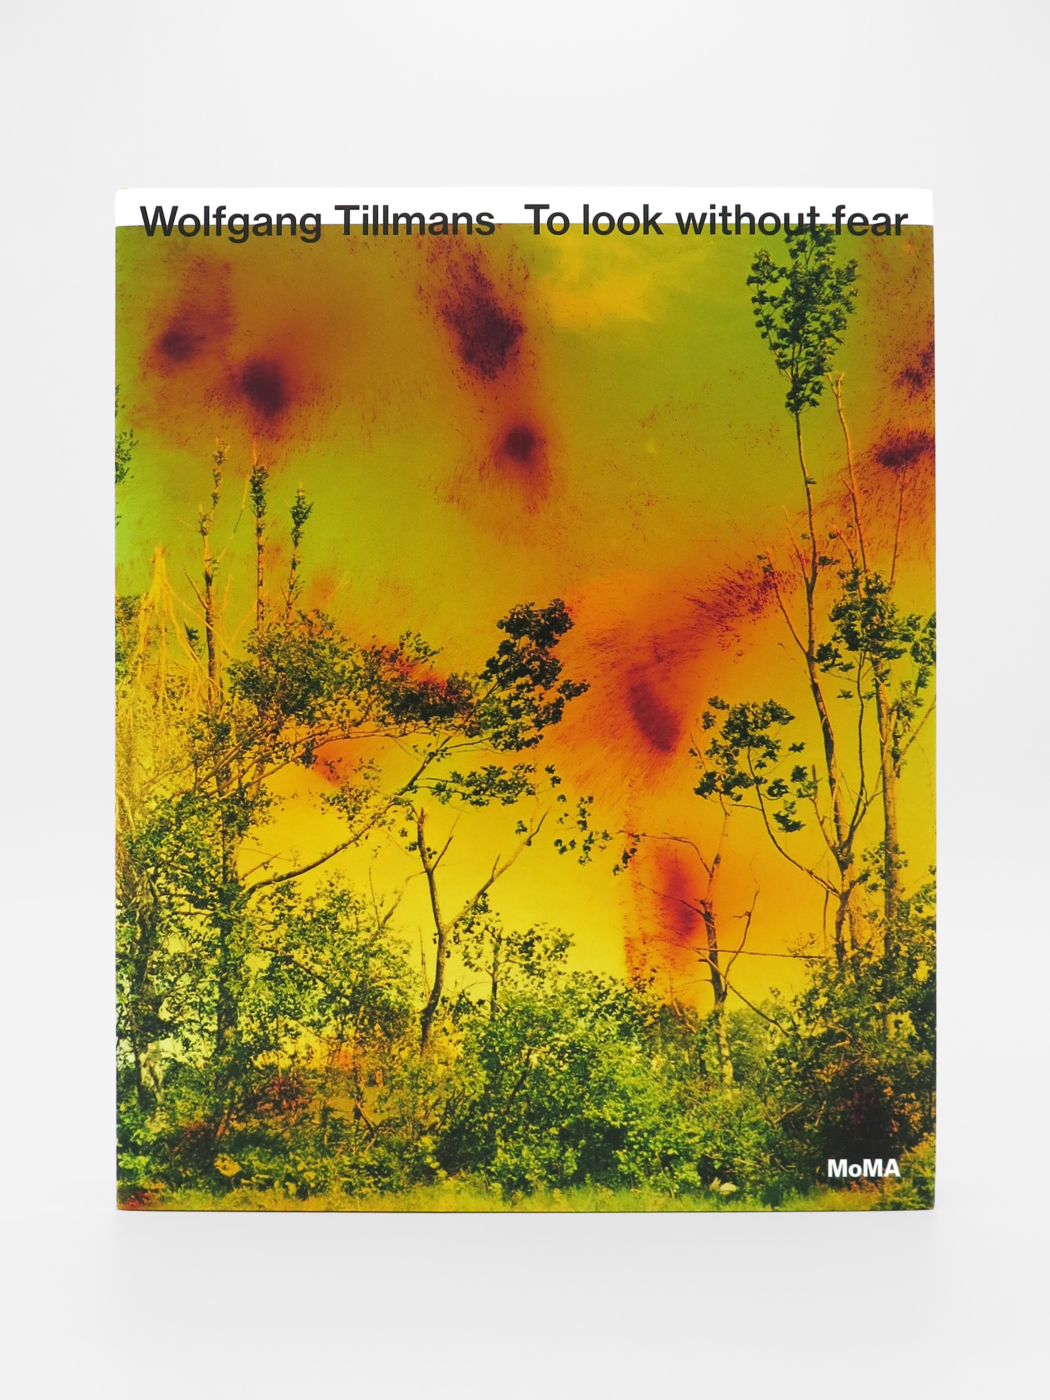 Wolfgang Tillmans, To look without fear